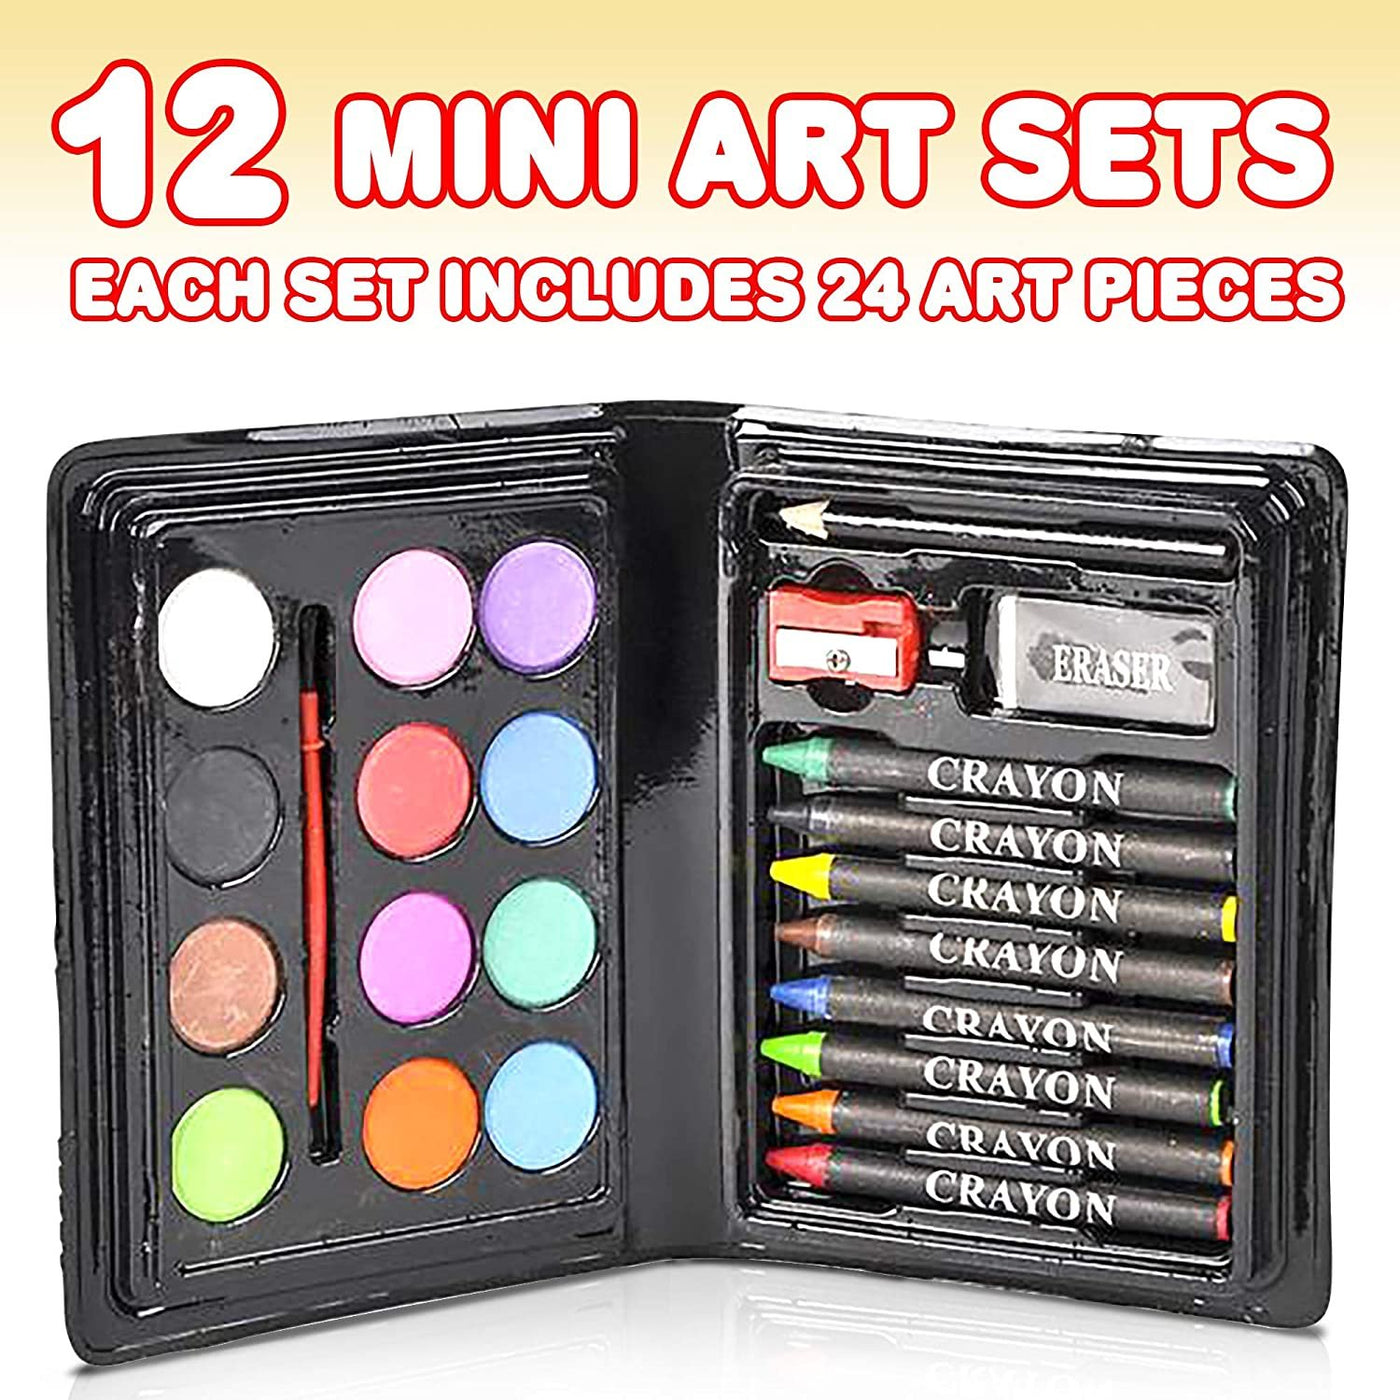 ArtCreativity Deluxe Art Set for Kids by Art Creativity - Ideal Beginner Artist Kit Includes 101 Pieces - Watercolor, Crayons, Colored Markers, Color